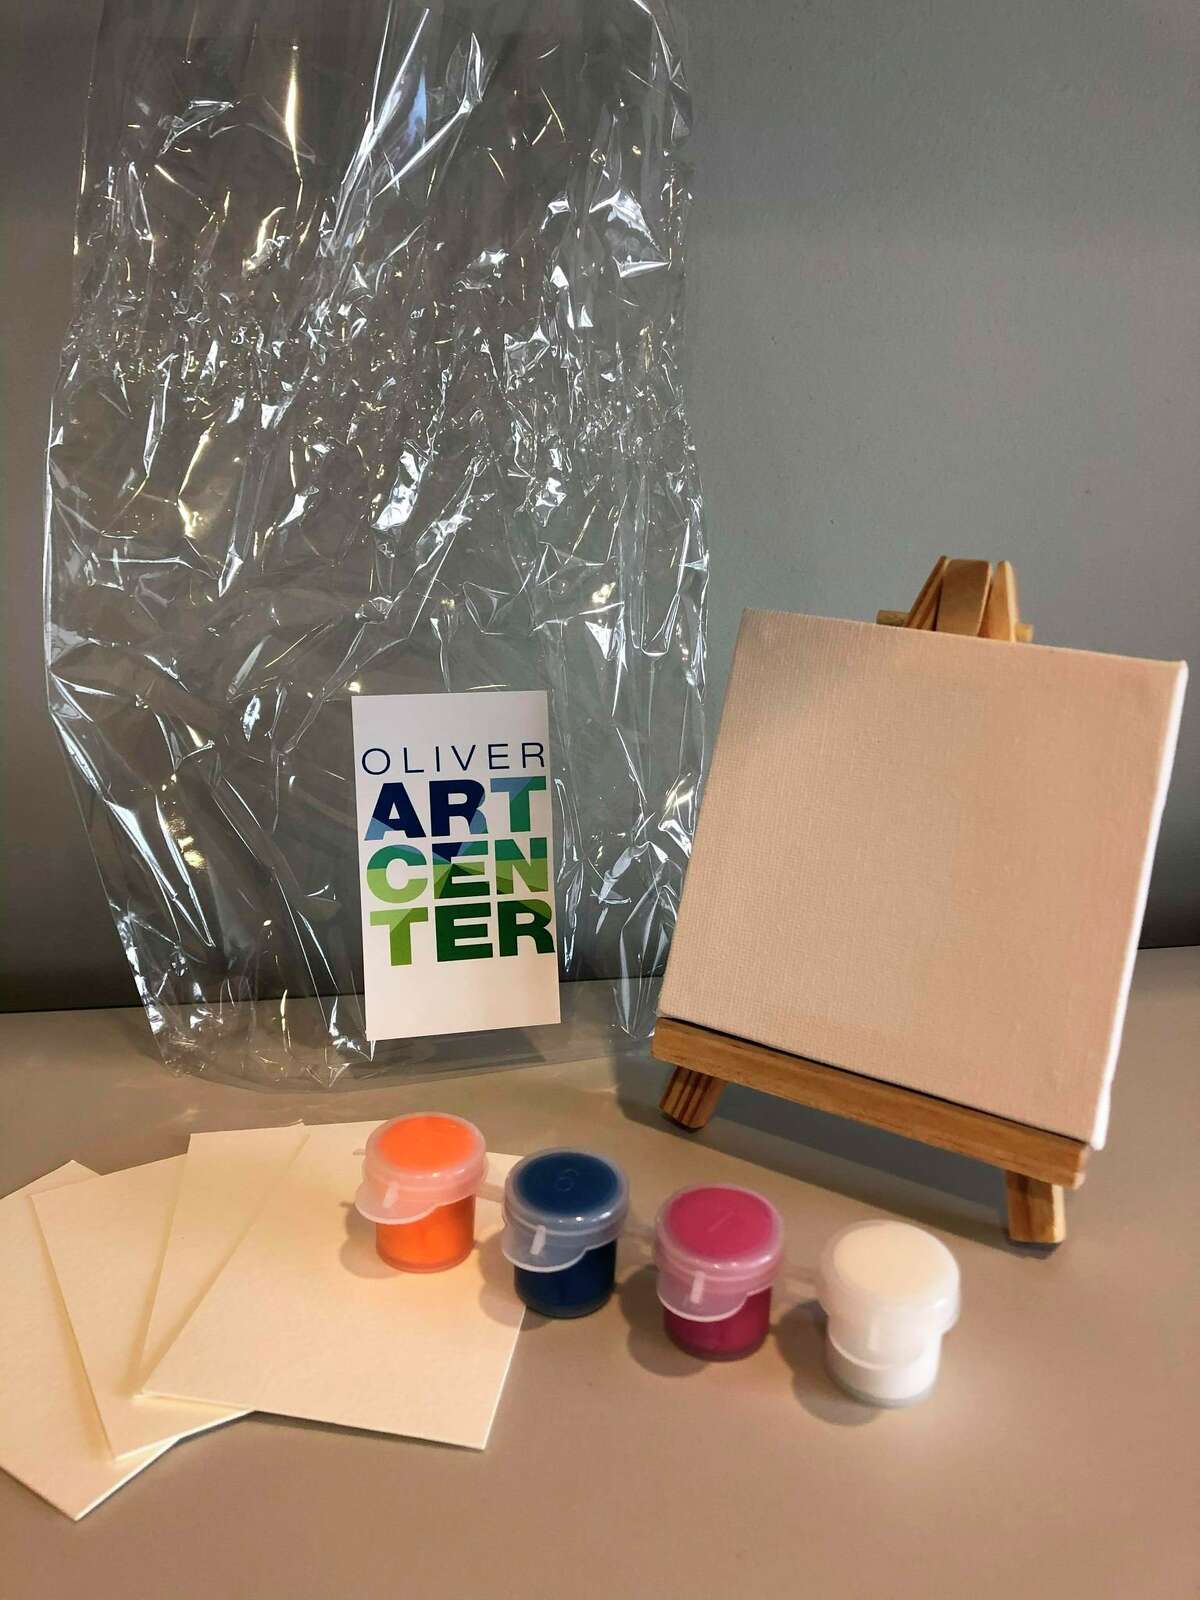 Donations can be made for the Oliver Art Center's Little Free Art Galleries. (Courtesy photo)